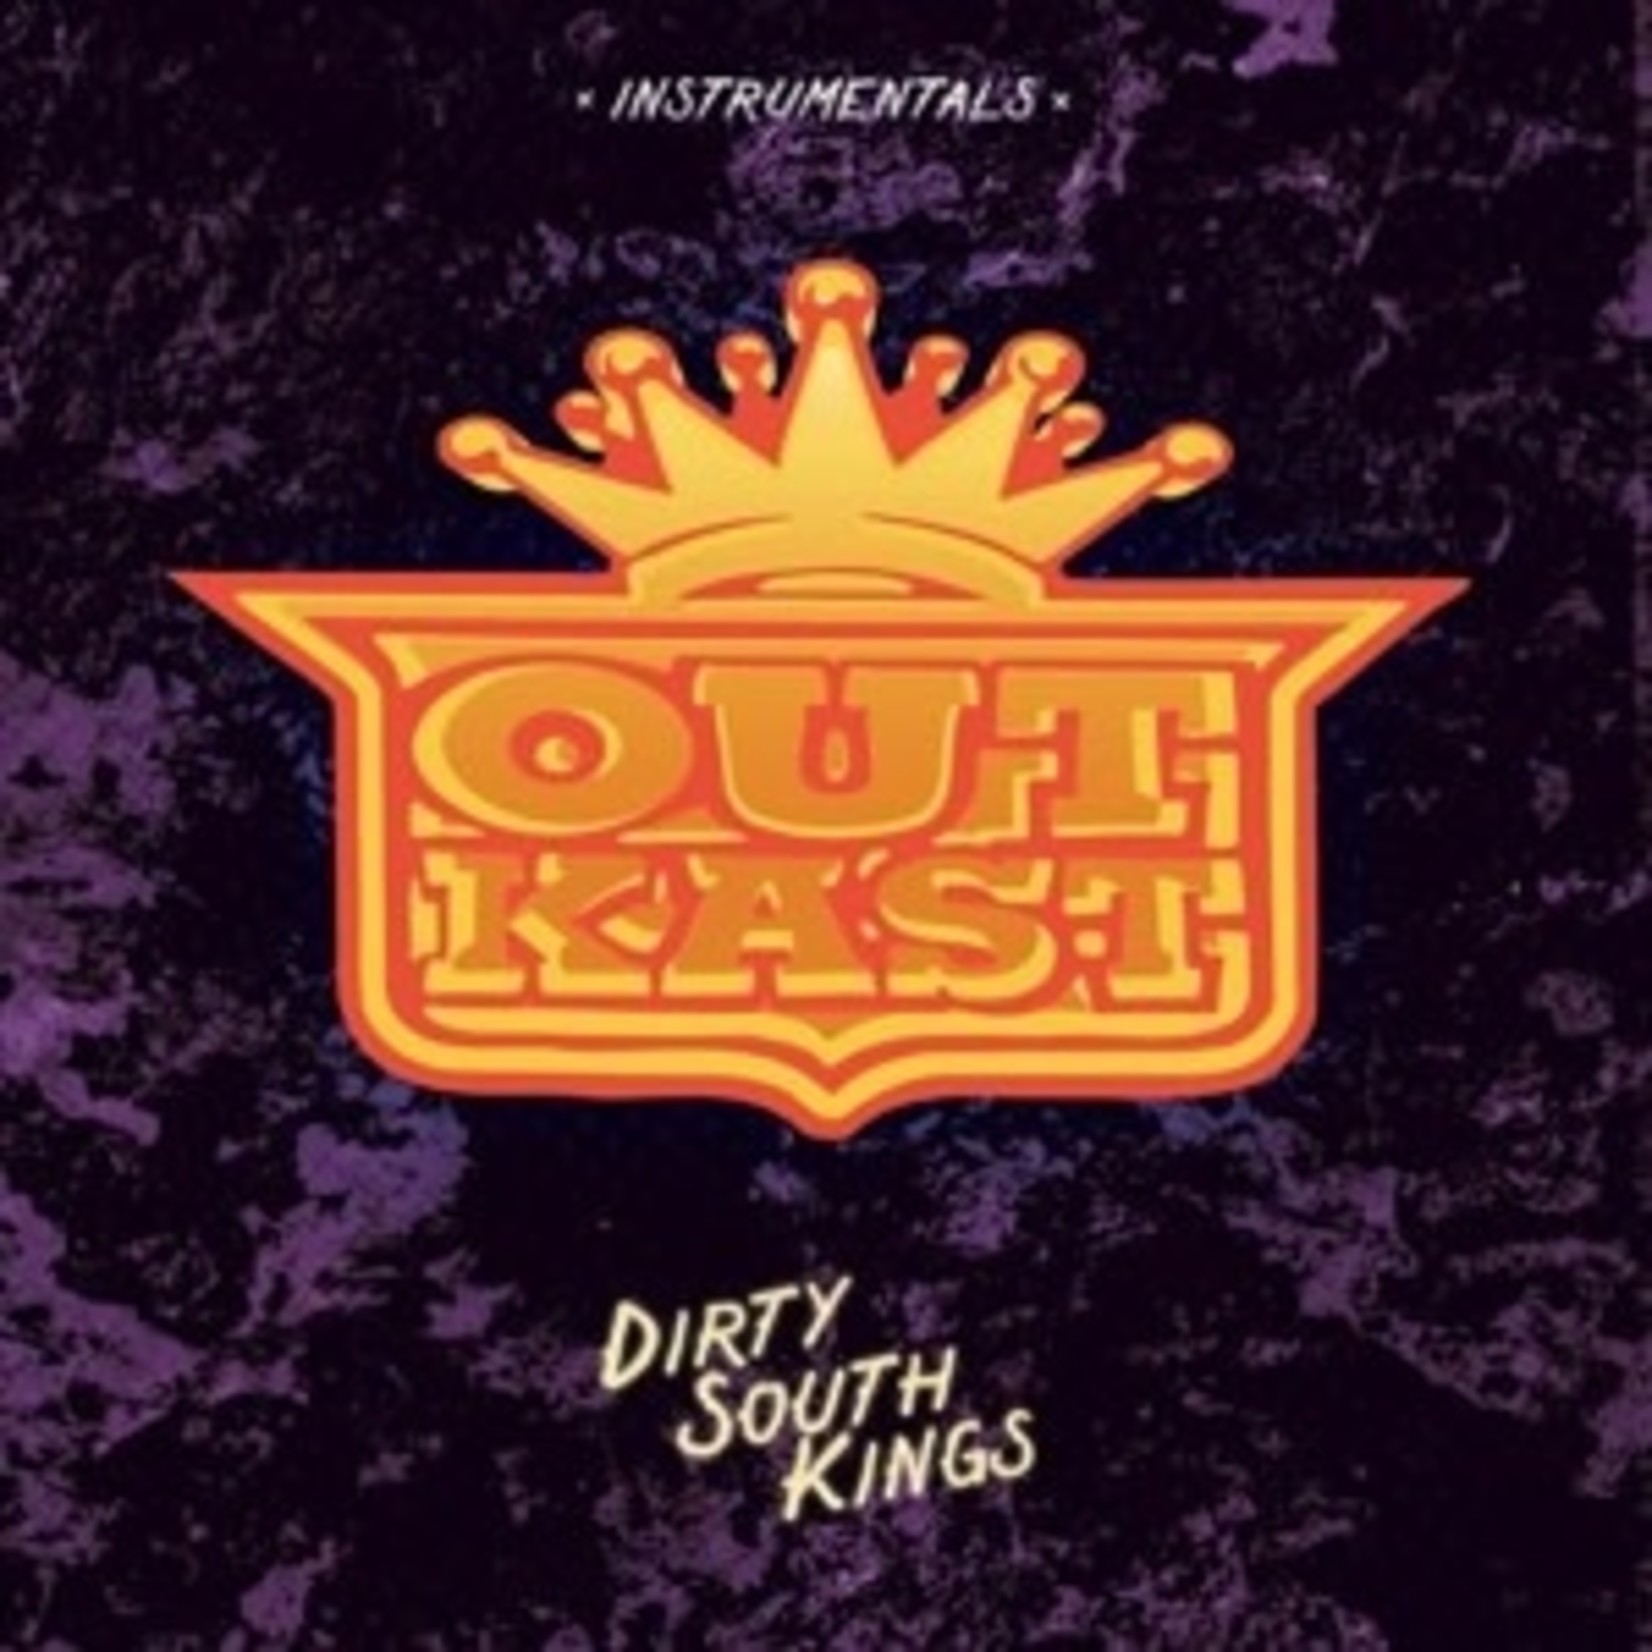 OUTKAST - DIRTY SOUTH KINGS INSTRUMENTALS